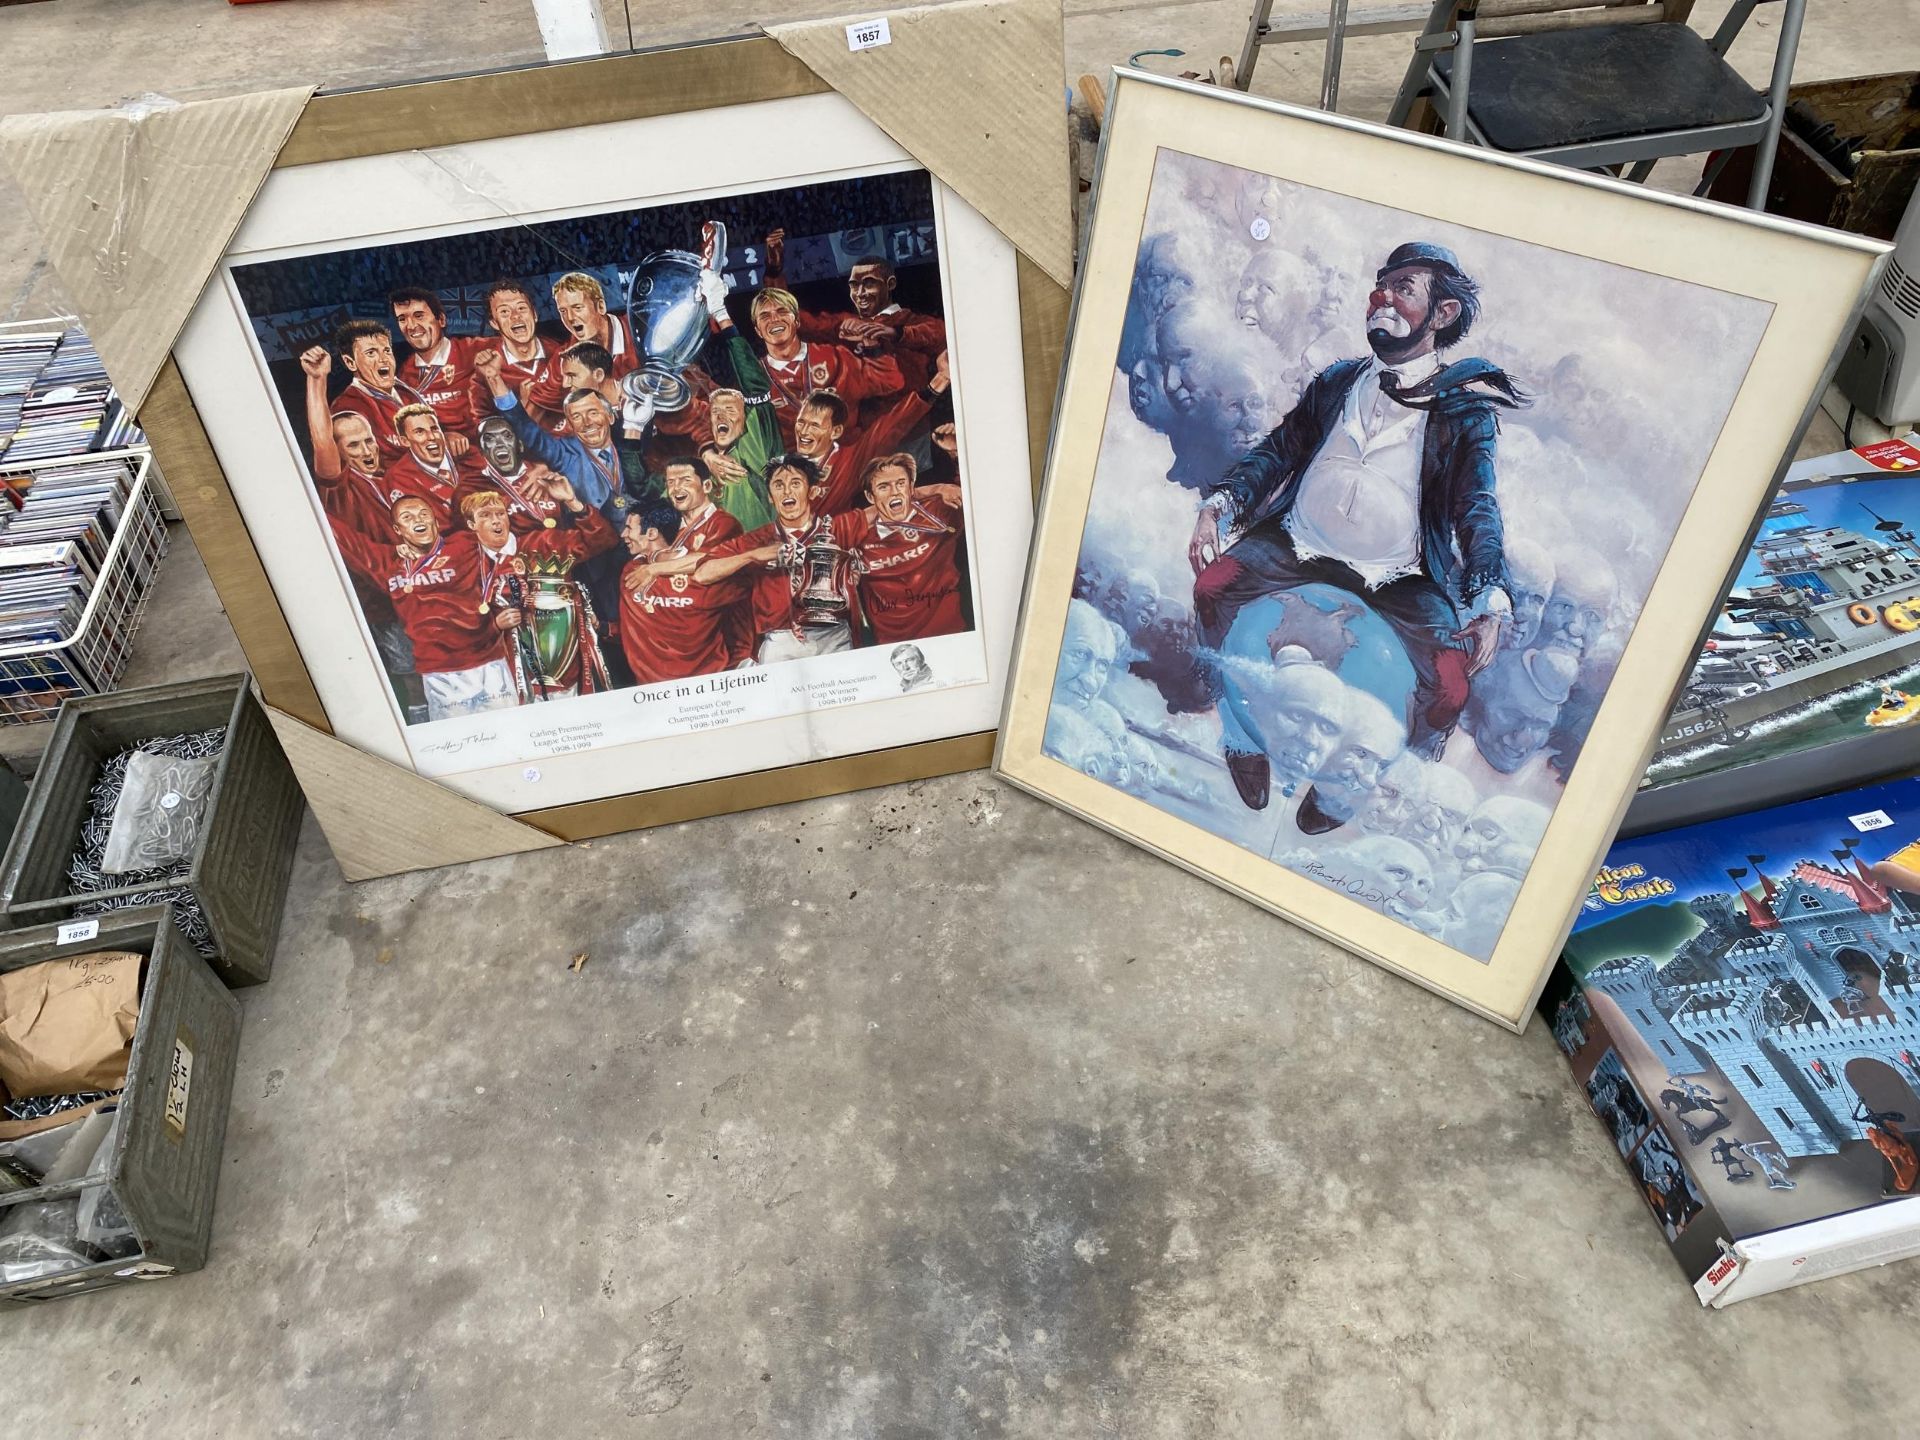 A FRAMED PRINT OF A CLOWN AND A FRAMED PRINT OF THE MANCHESTER UNITED 1999 TREBLE WINNERS